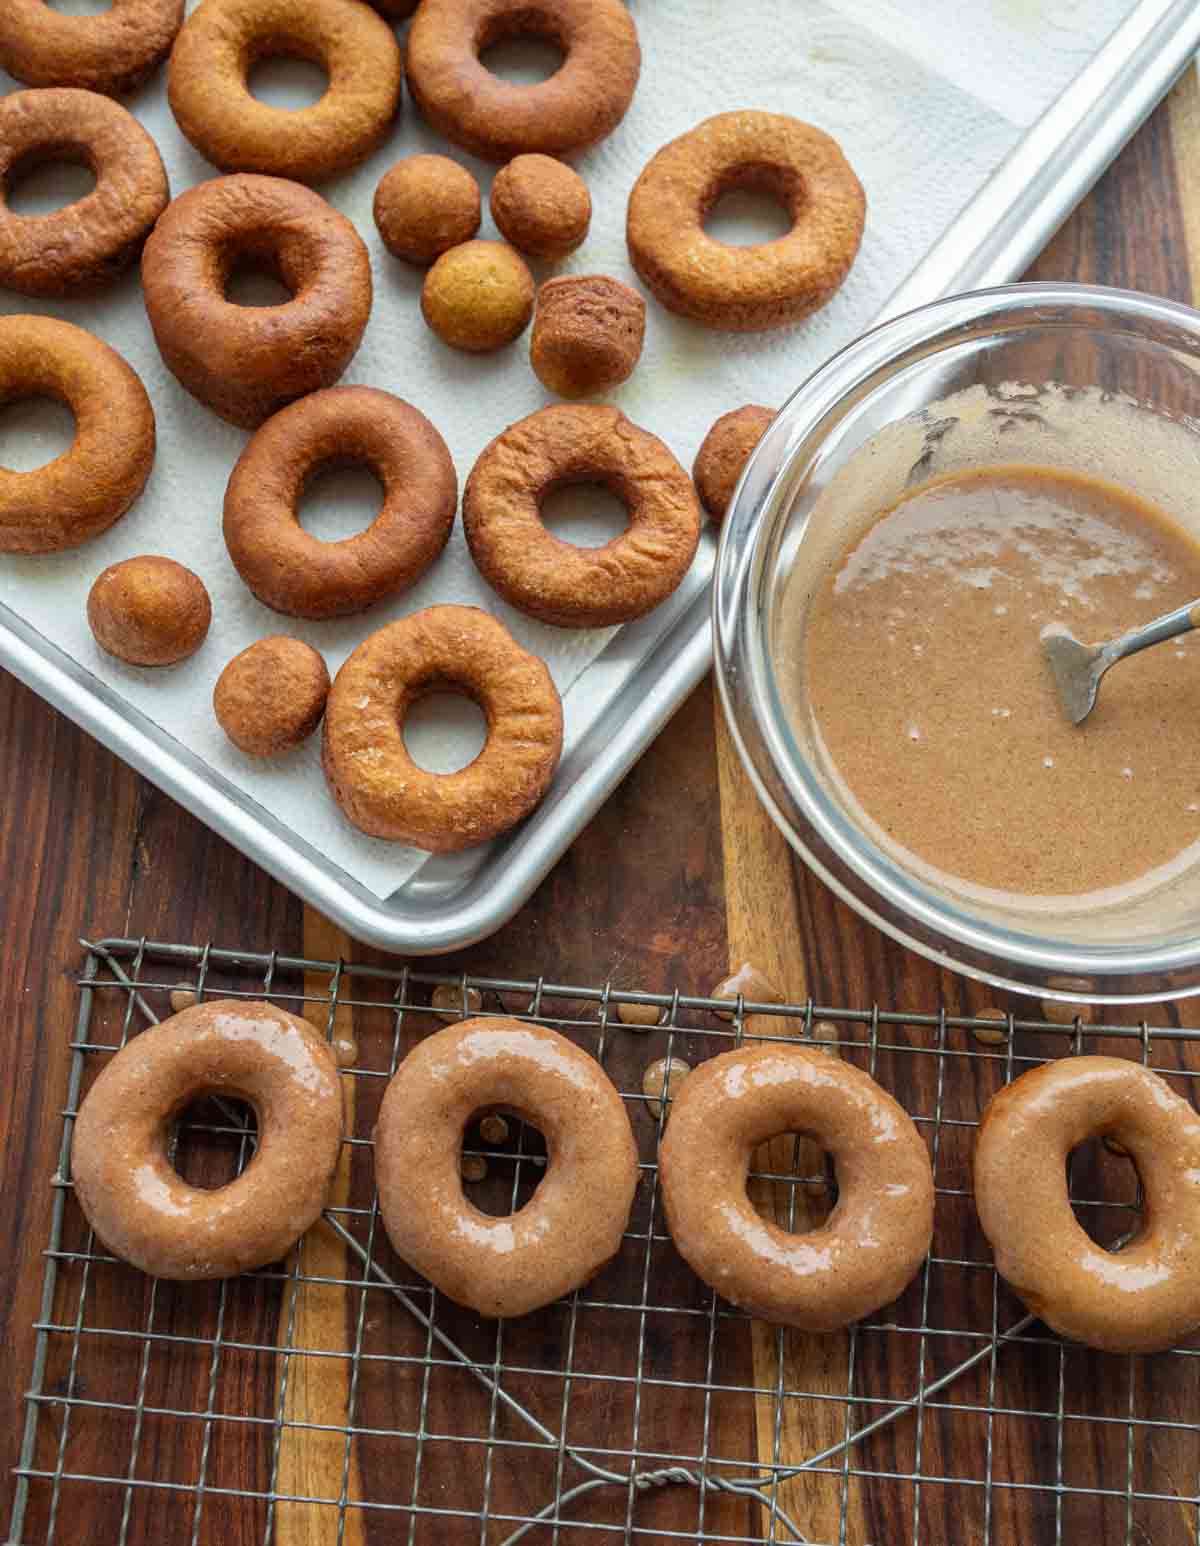 aesthetic view of pumpkin donuts before and after being glazed